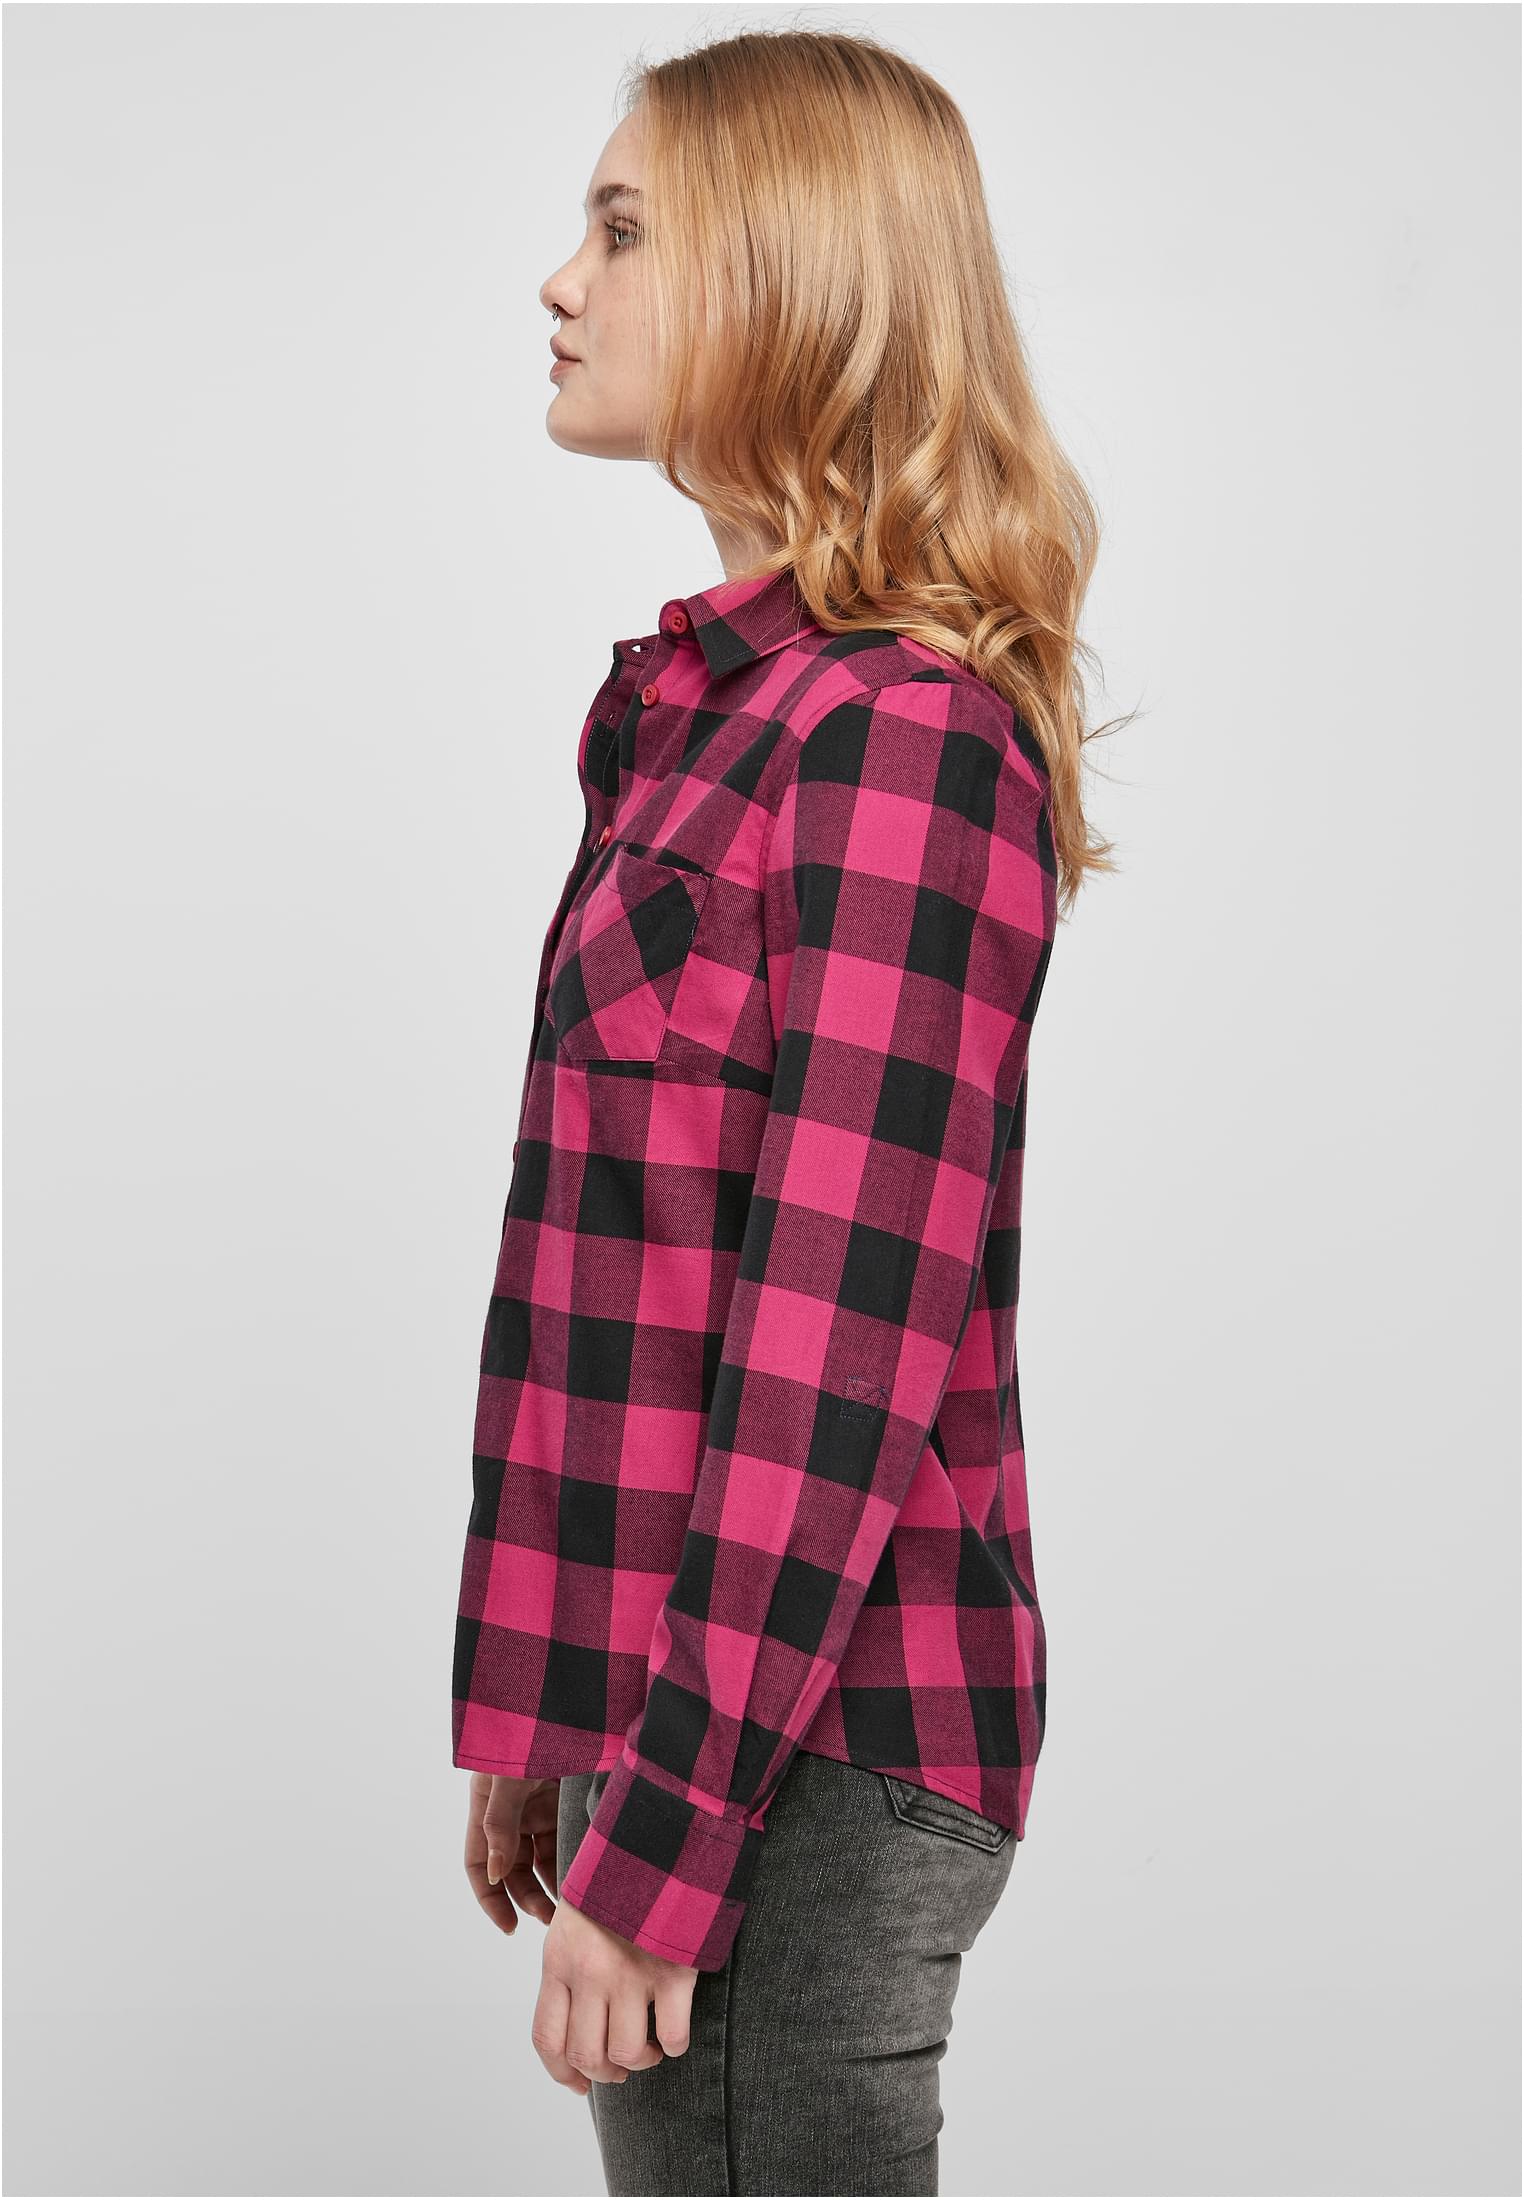 Damen Ladies Turnup Checked Flanell Shirt in Farbe wildviolet/black